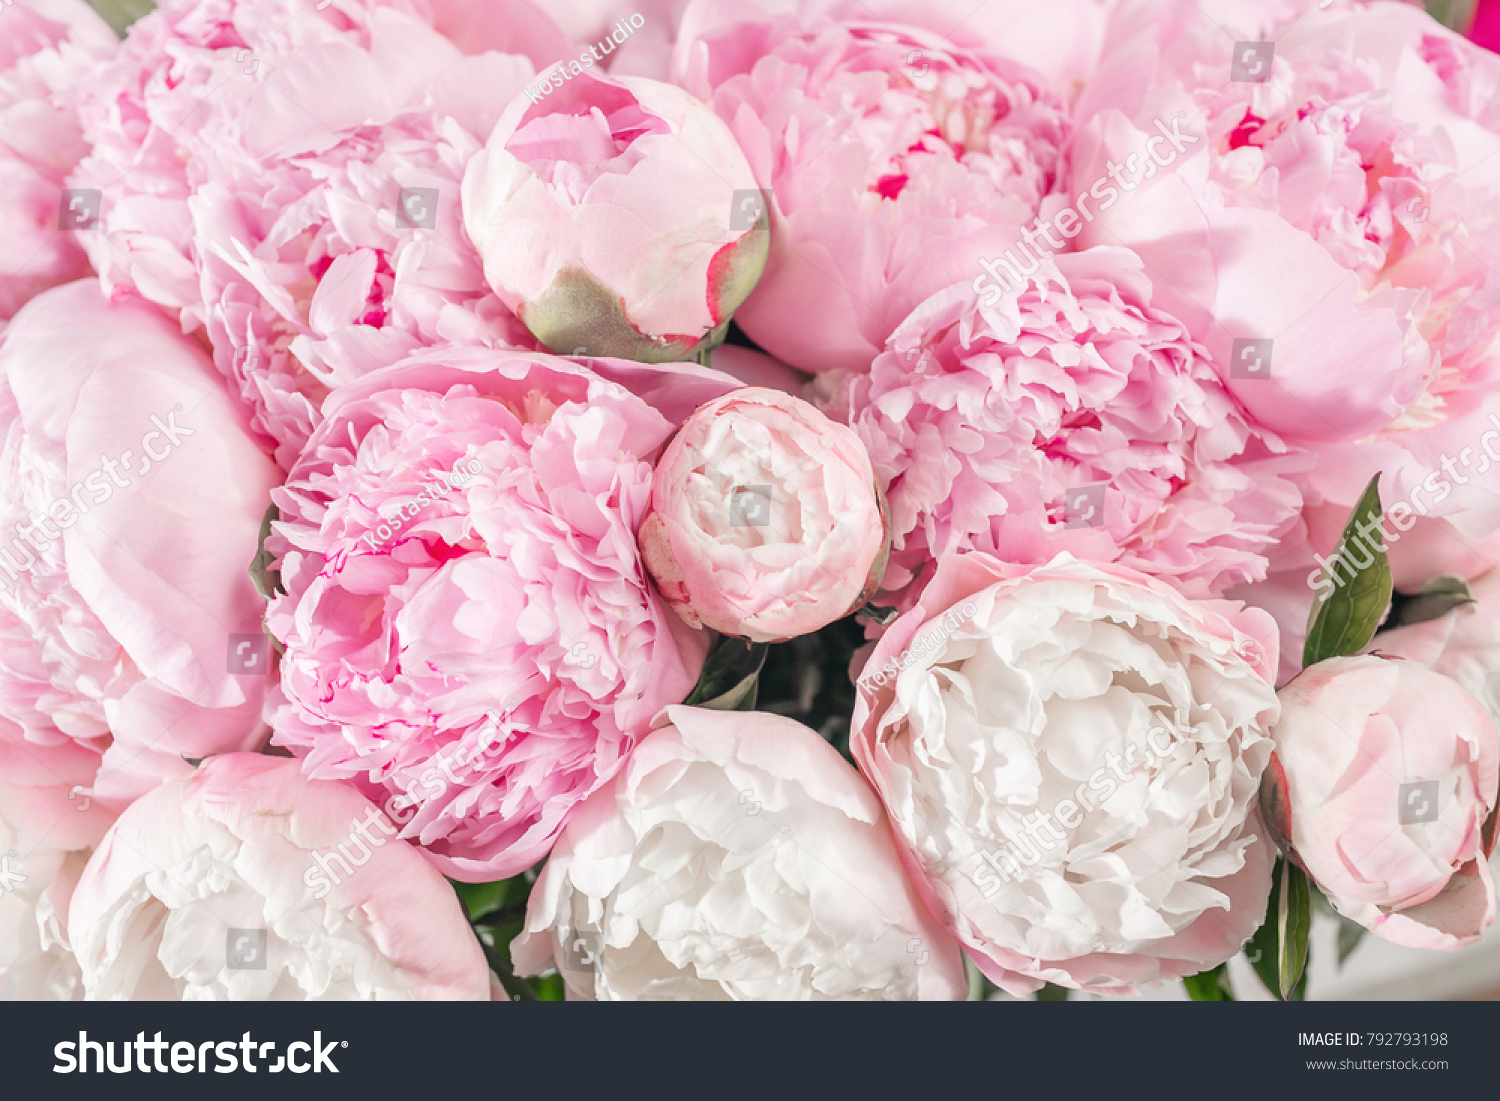 Elegant bouquet of a lot of peonies of pink color close up. Beautiful flower for any holiday. Lots of pretty and romantic flowers in floral shop. #792793198